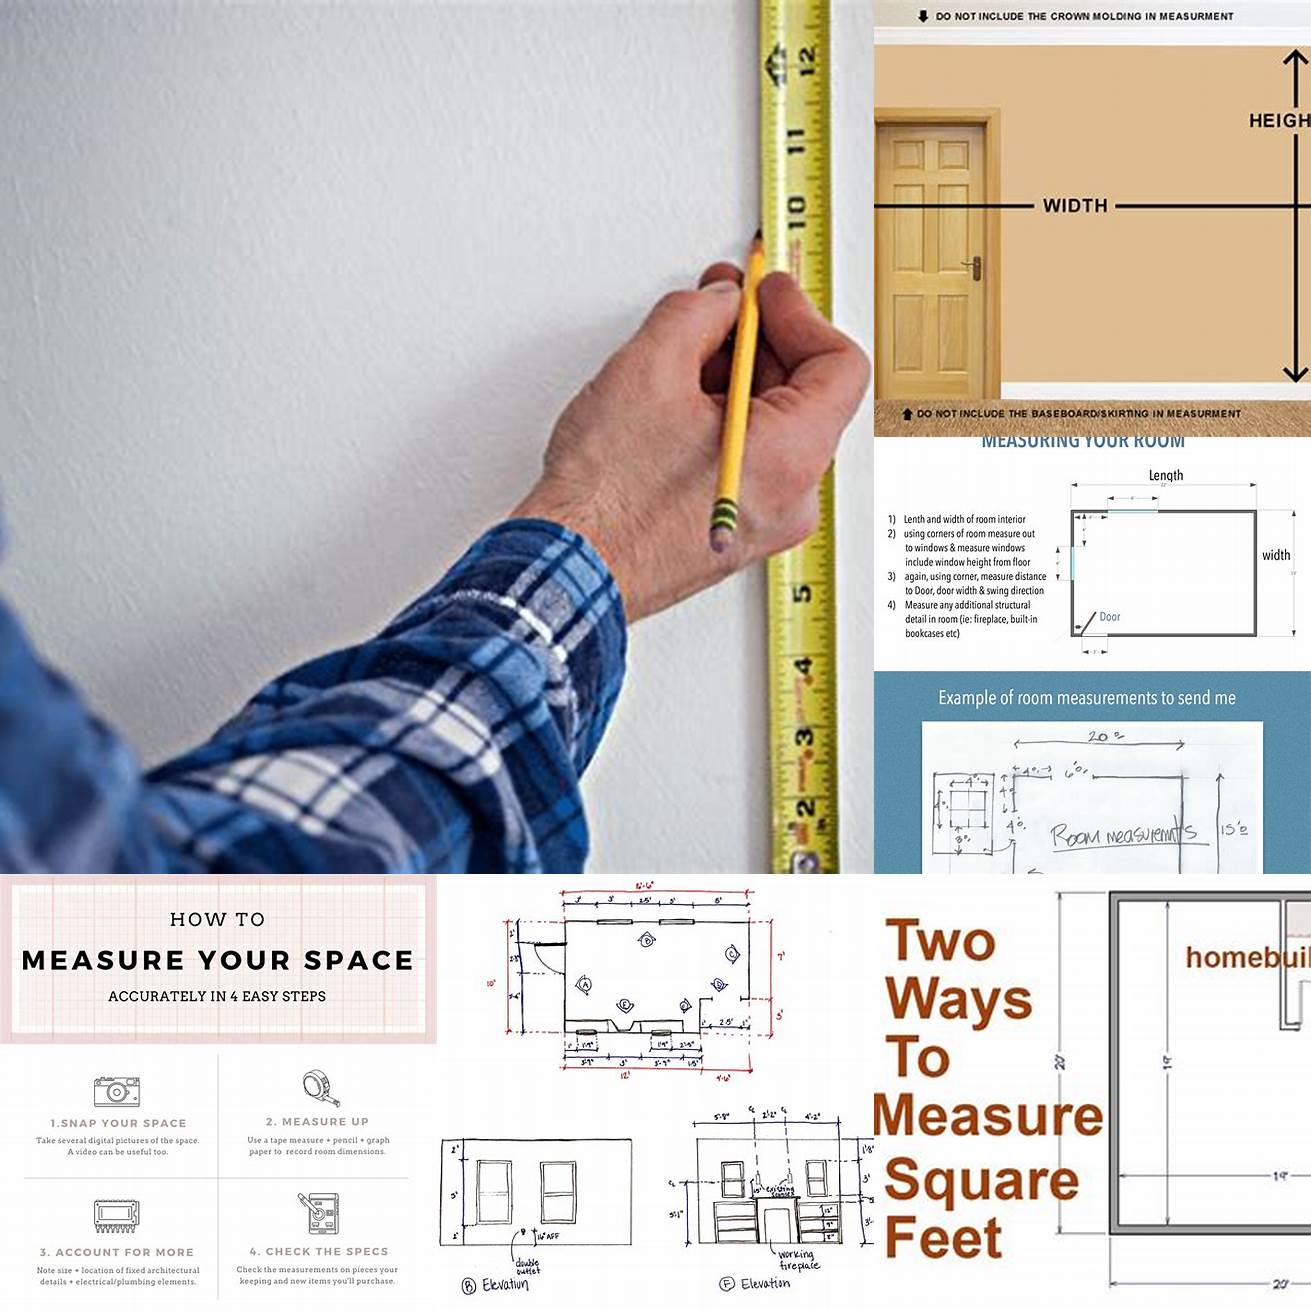 Measure your space